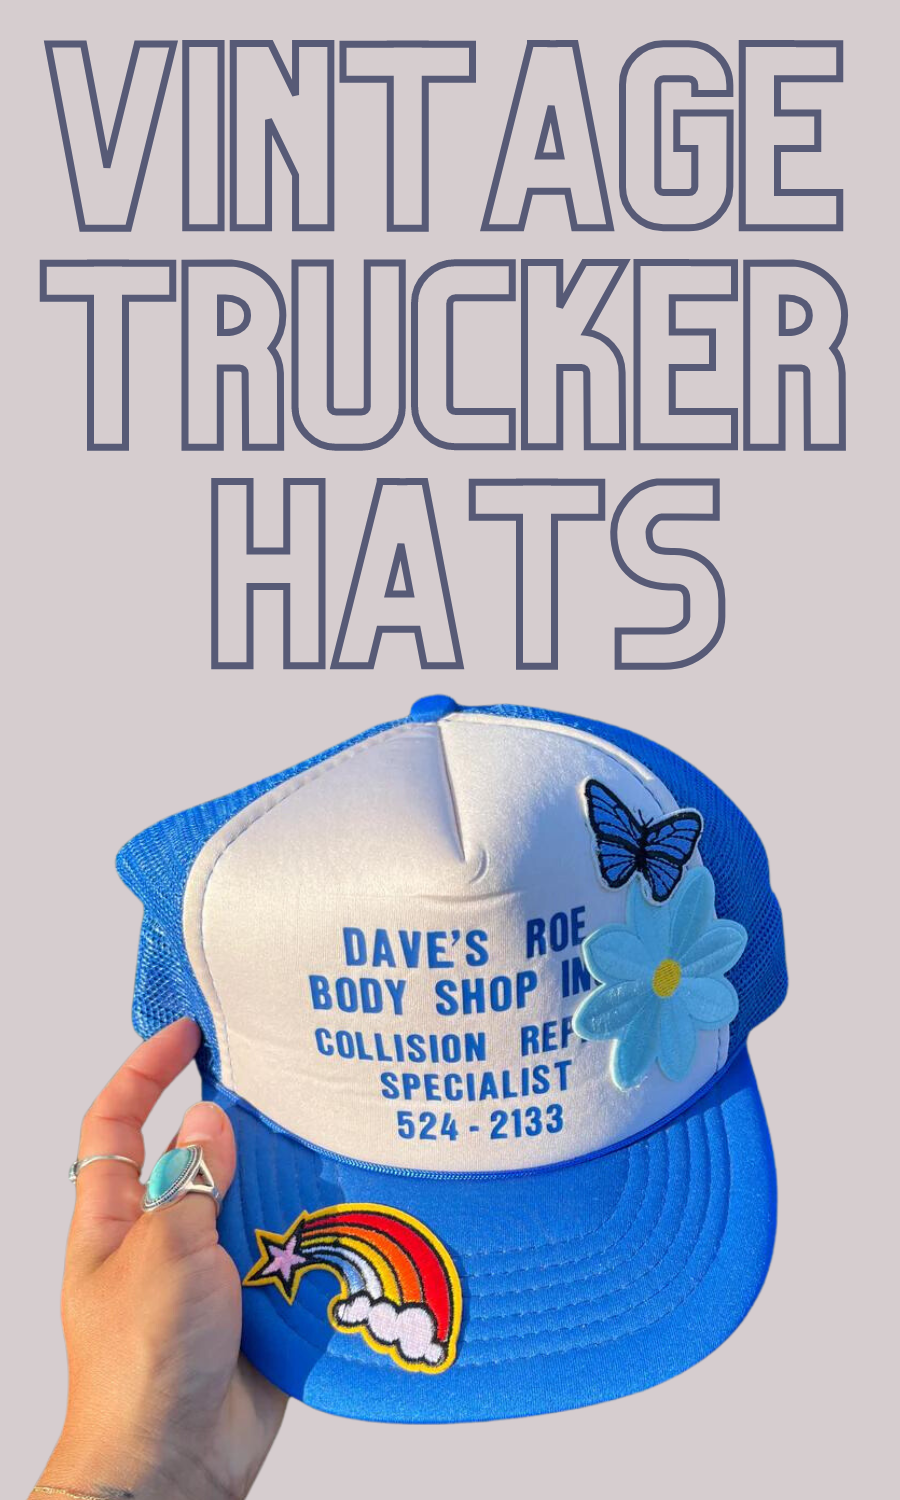 files/Vintage_Trucker_hats_900_x_1500_px.png